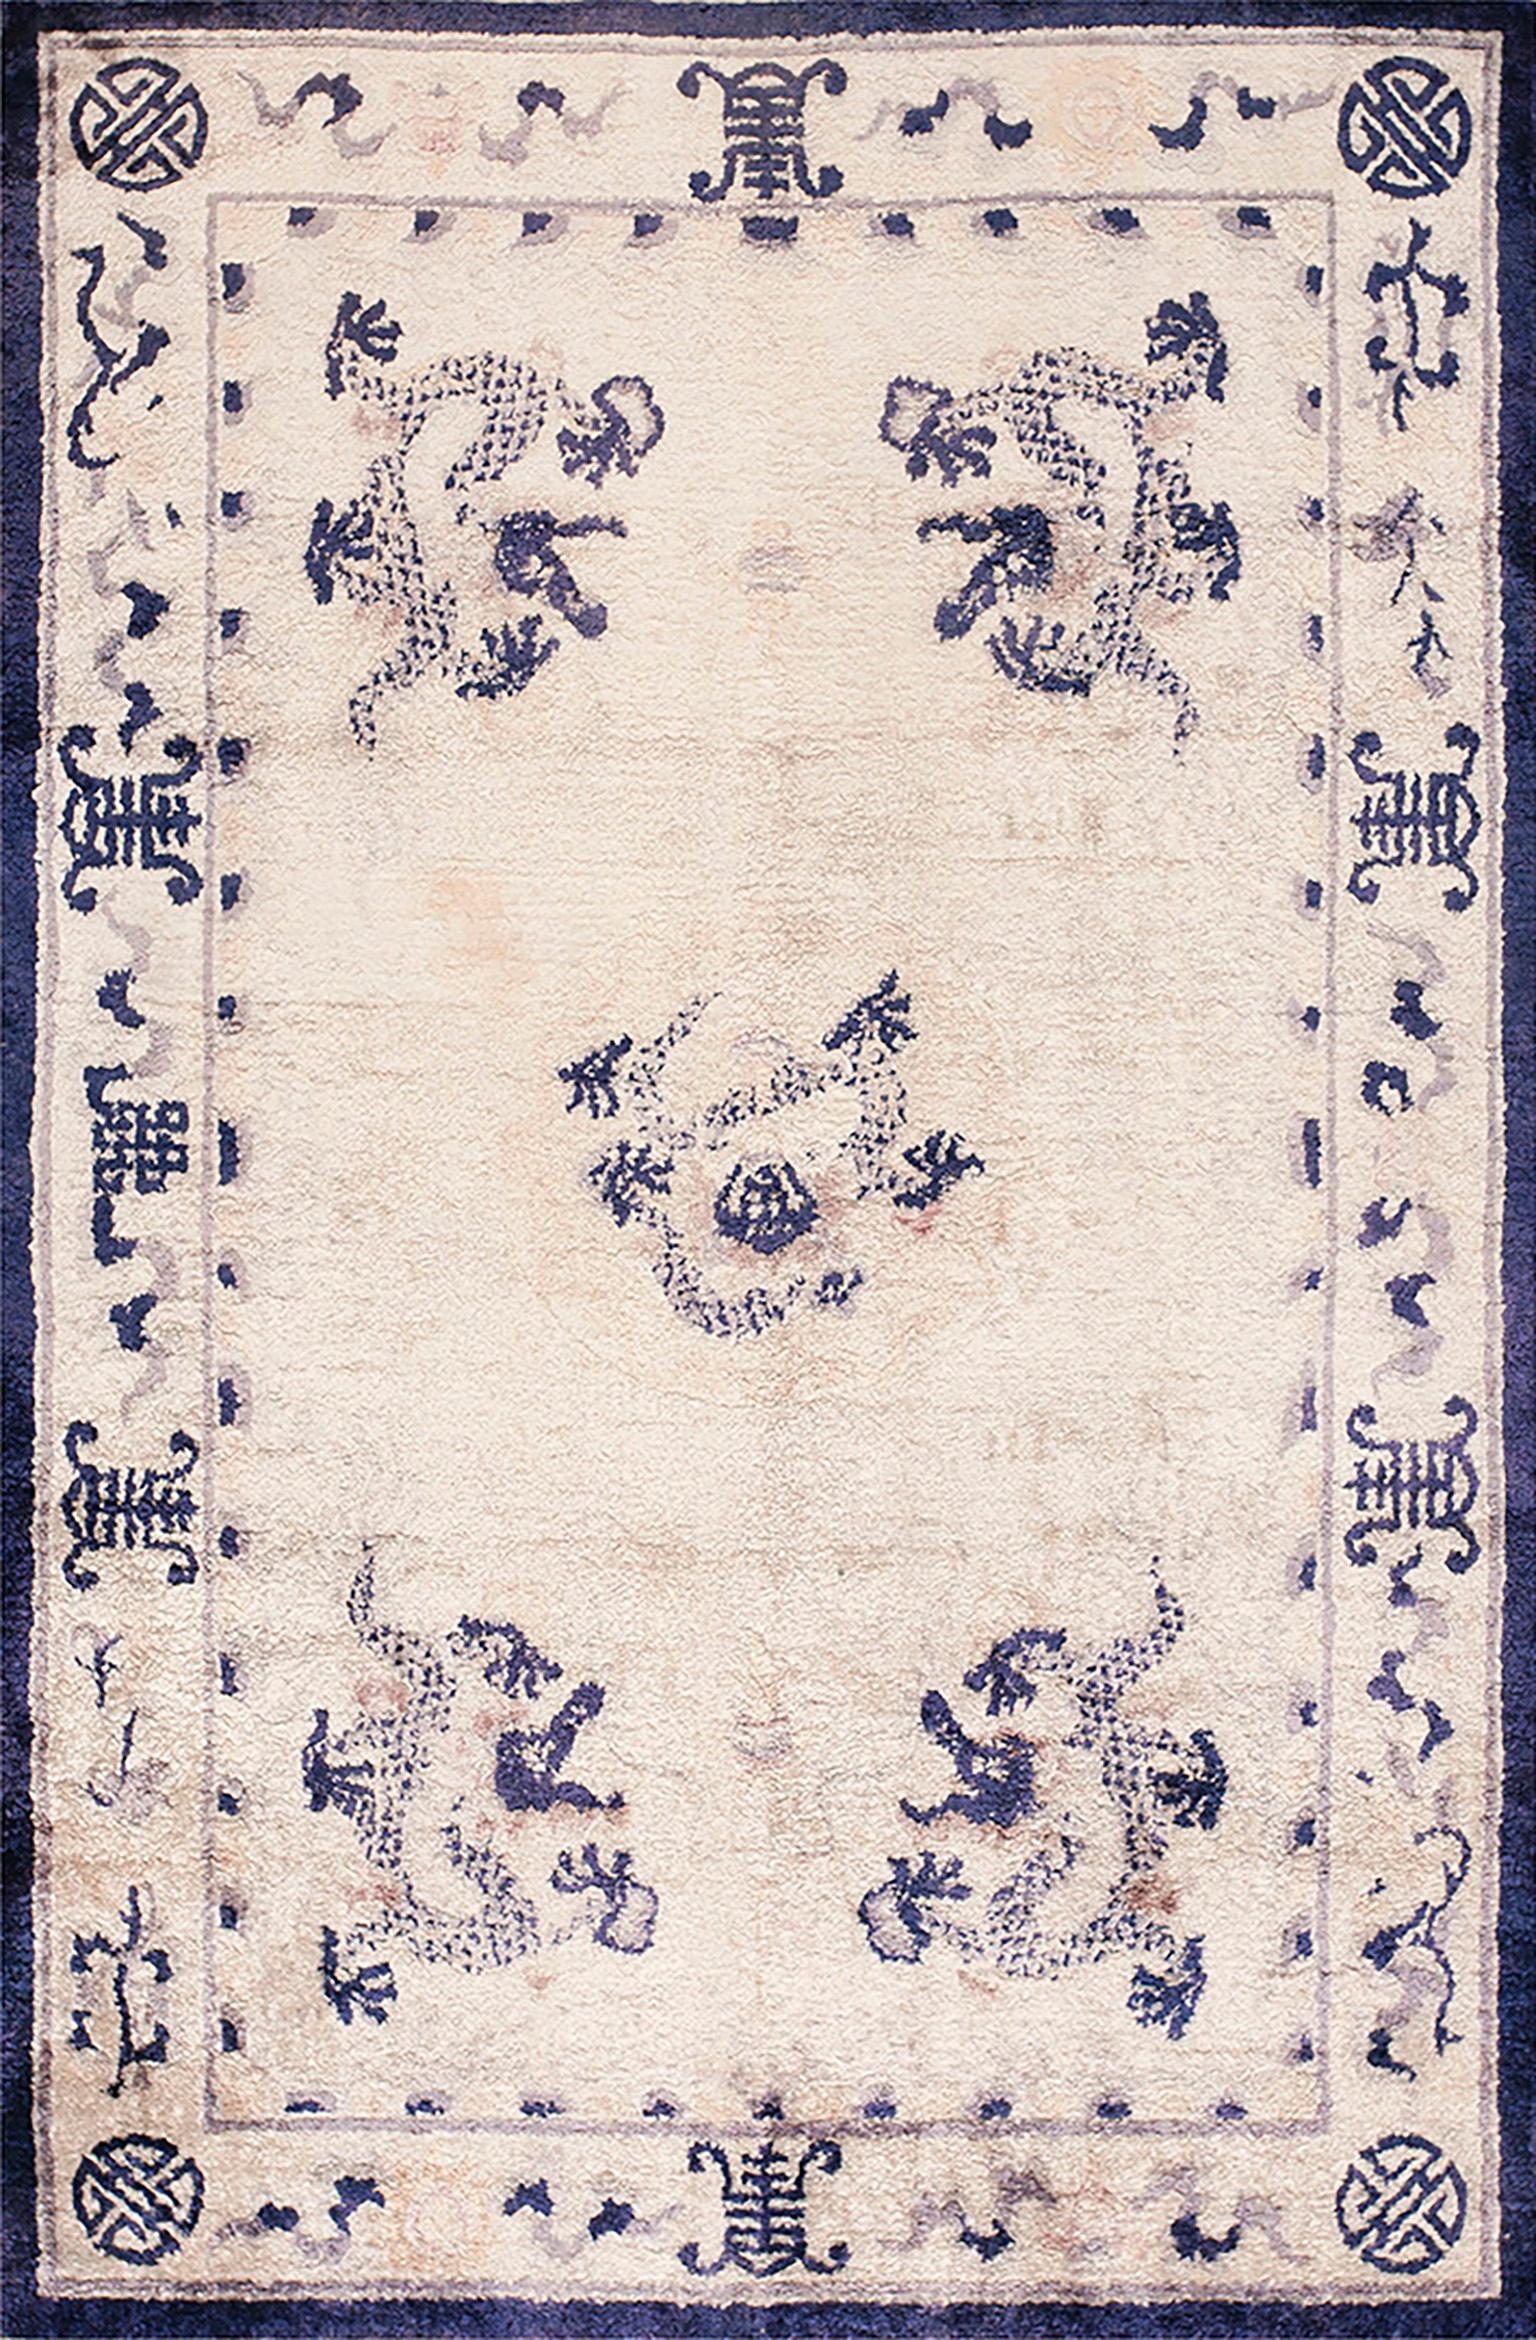 Early 20th Silk Chinese Dragon Carpet ( 4' x  6' - 122 x 183 )  For Sale